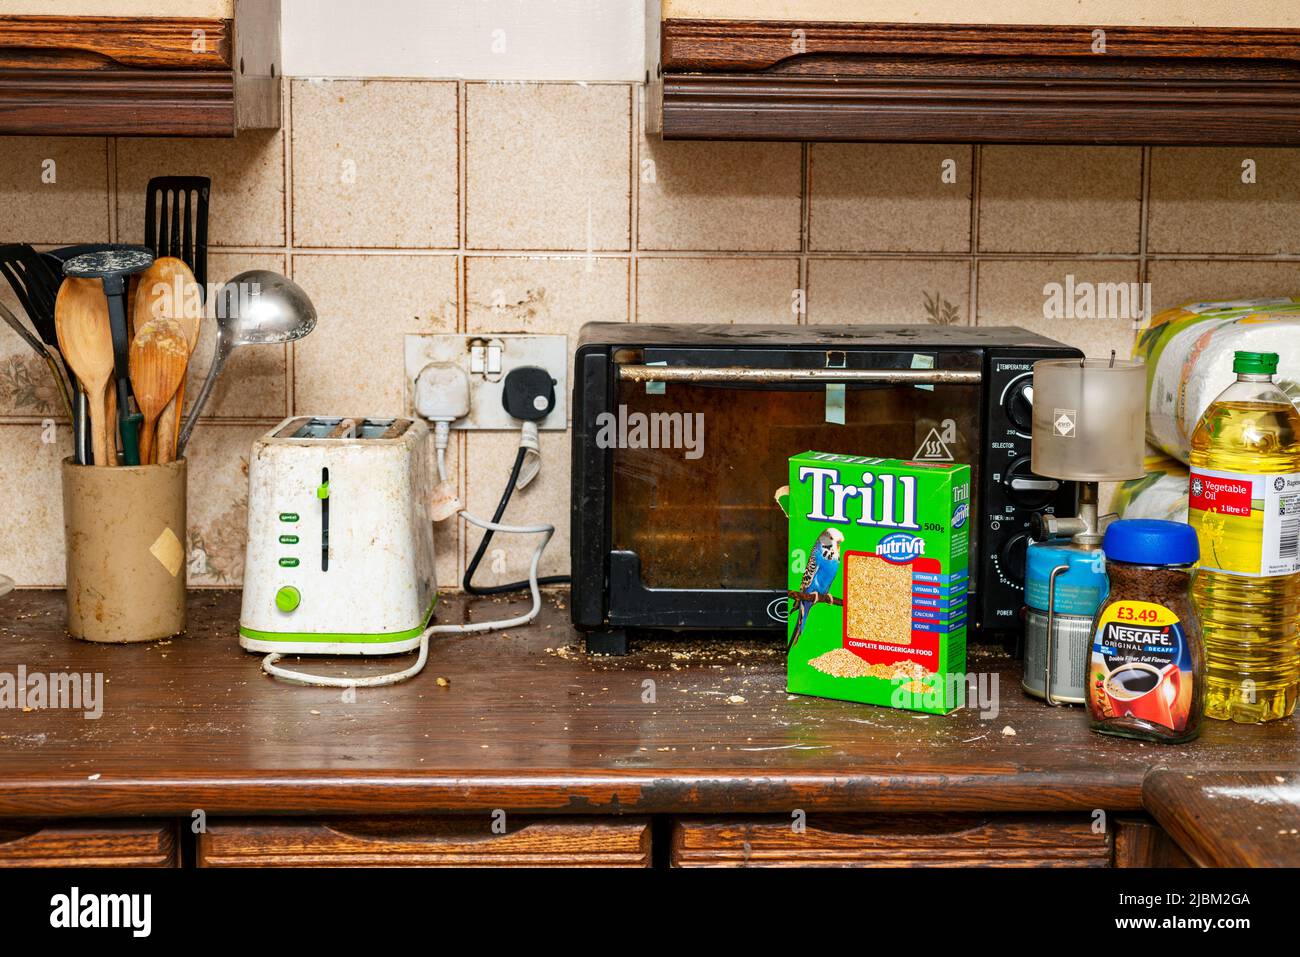 Messy and dirty kitchen worktop Stock Photo